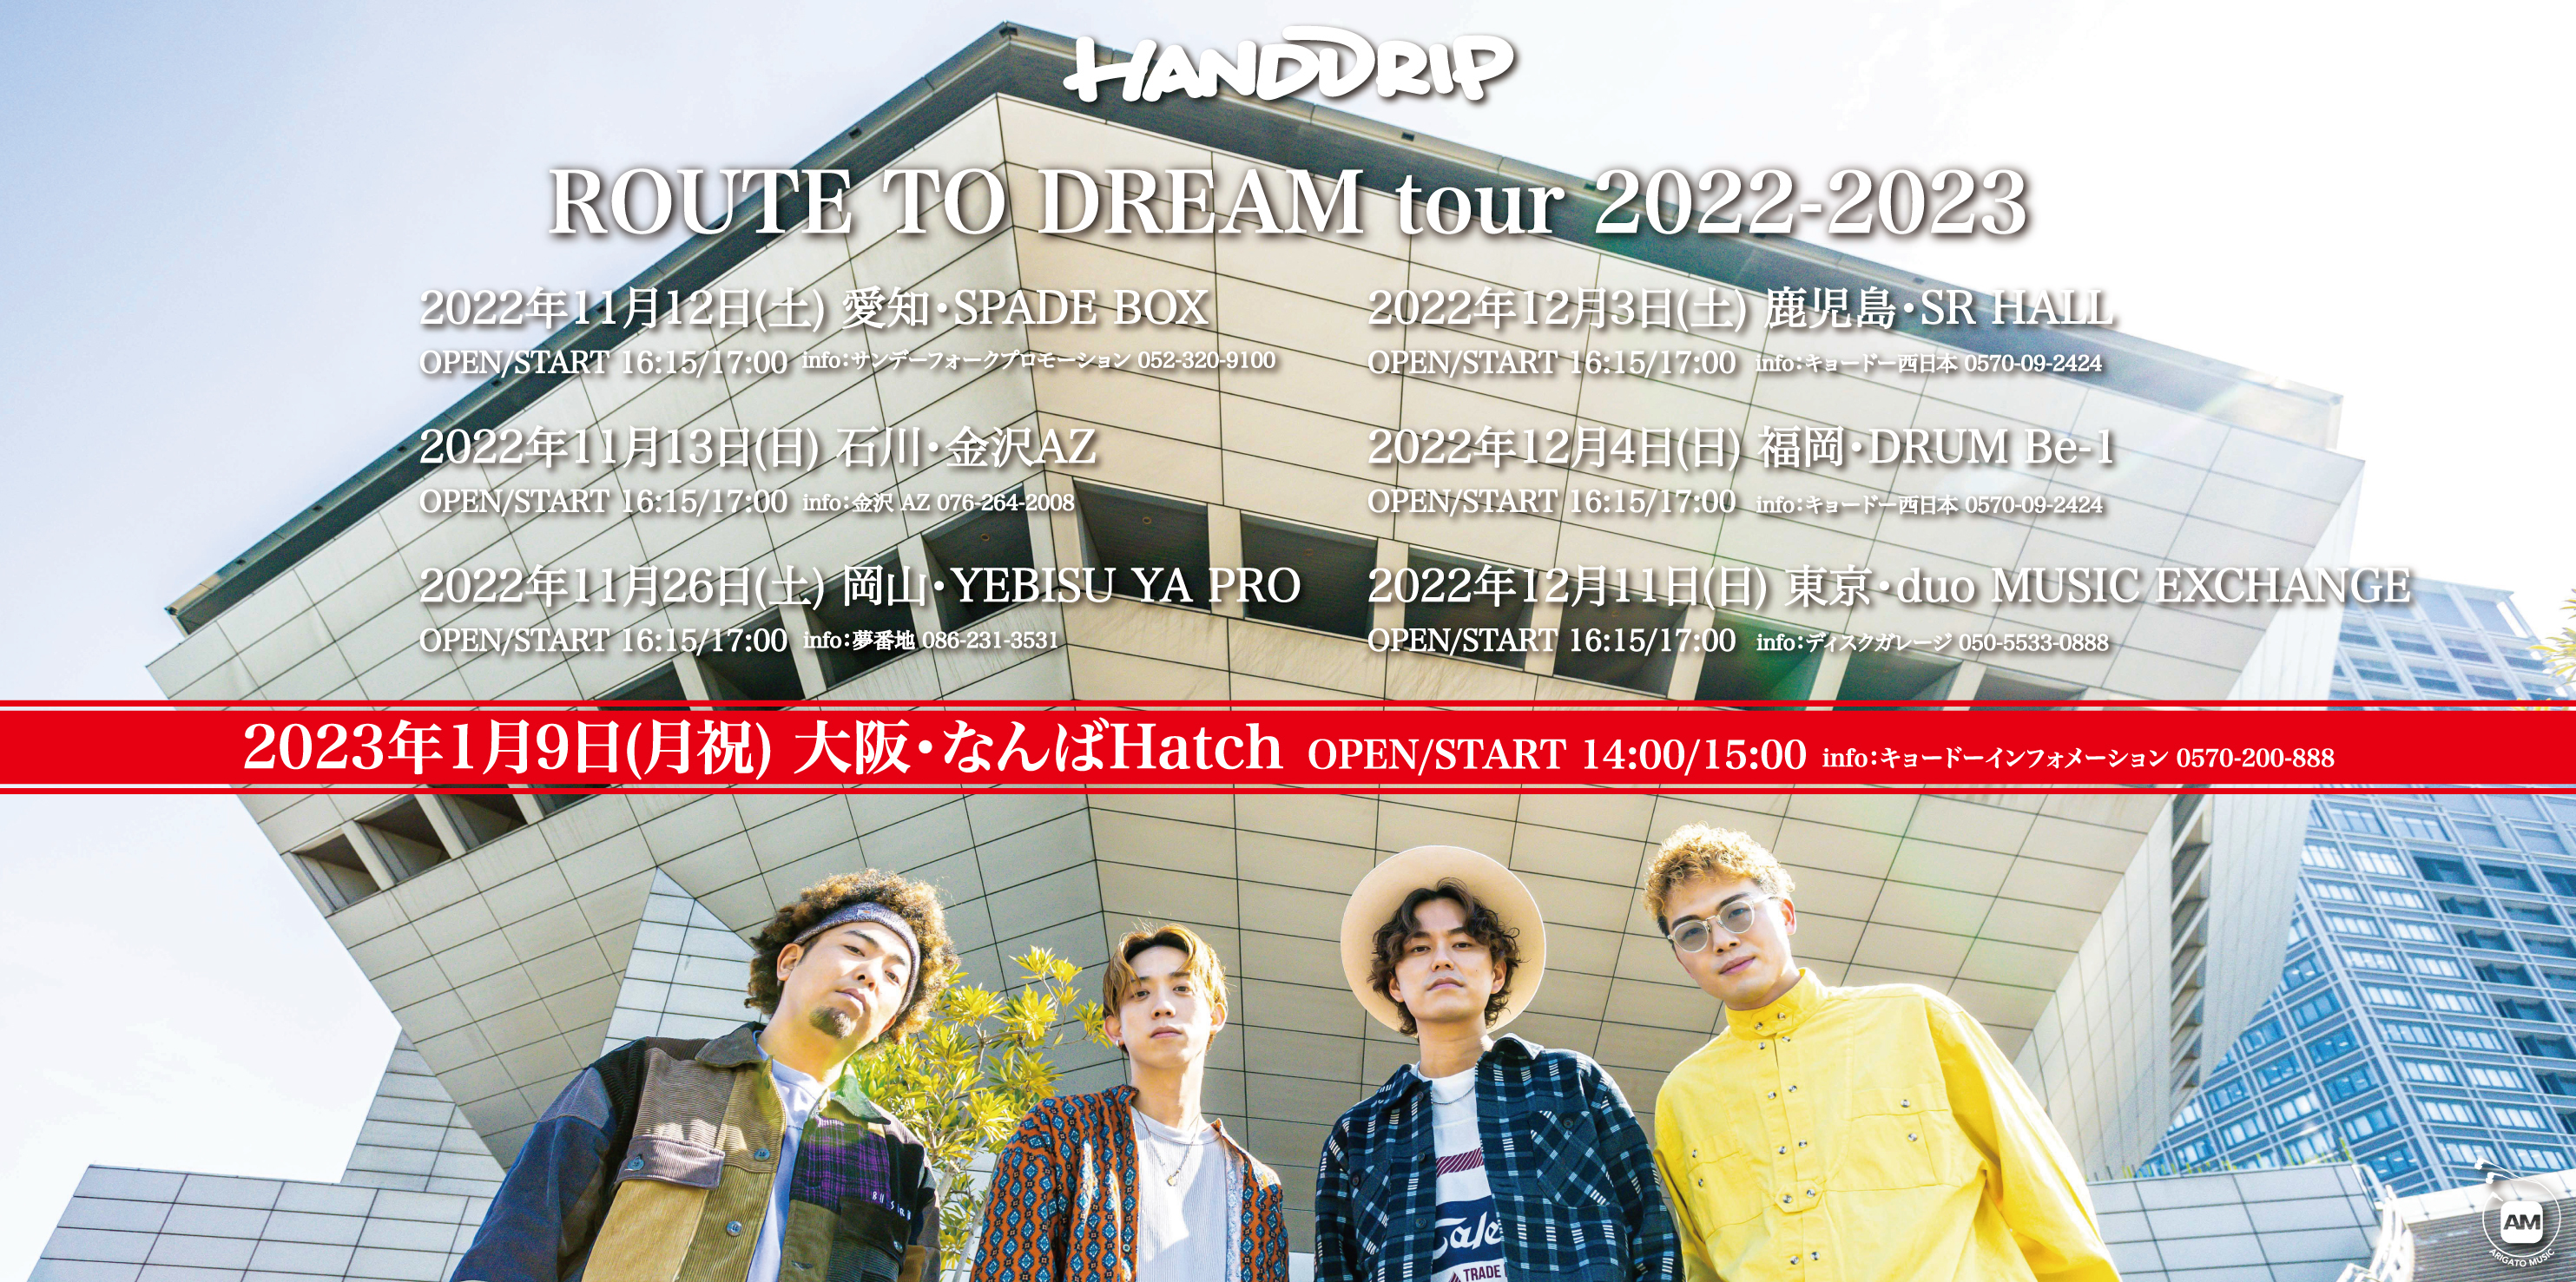 HAND DRIP ROUTE TO DREAM tour 2022-2023